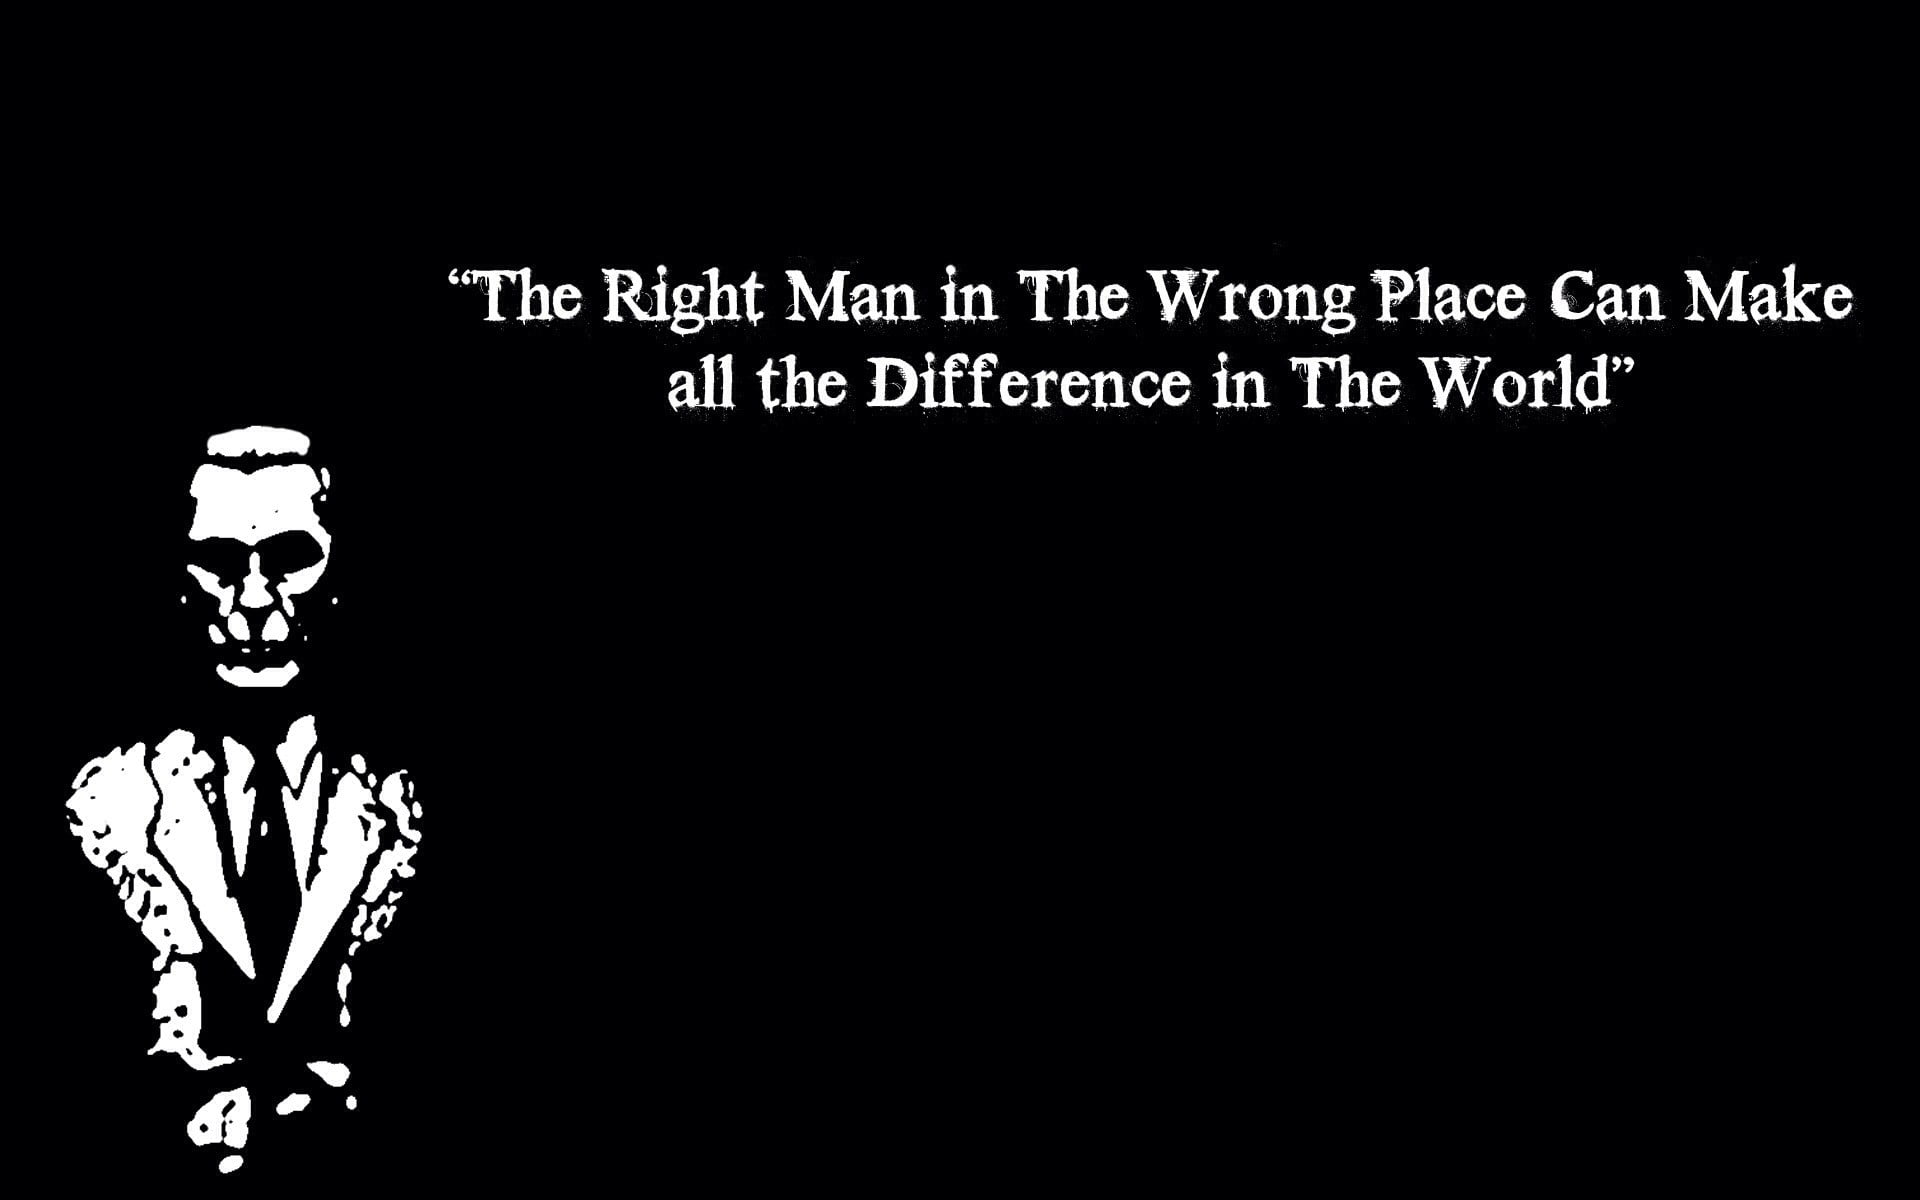 The right man in wrong place can make all the difference in the world text